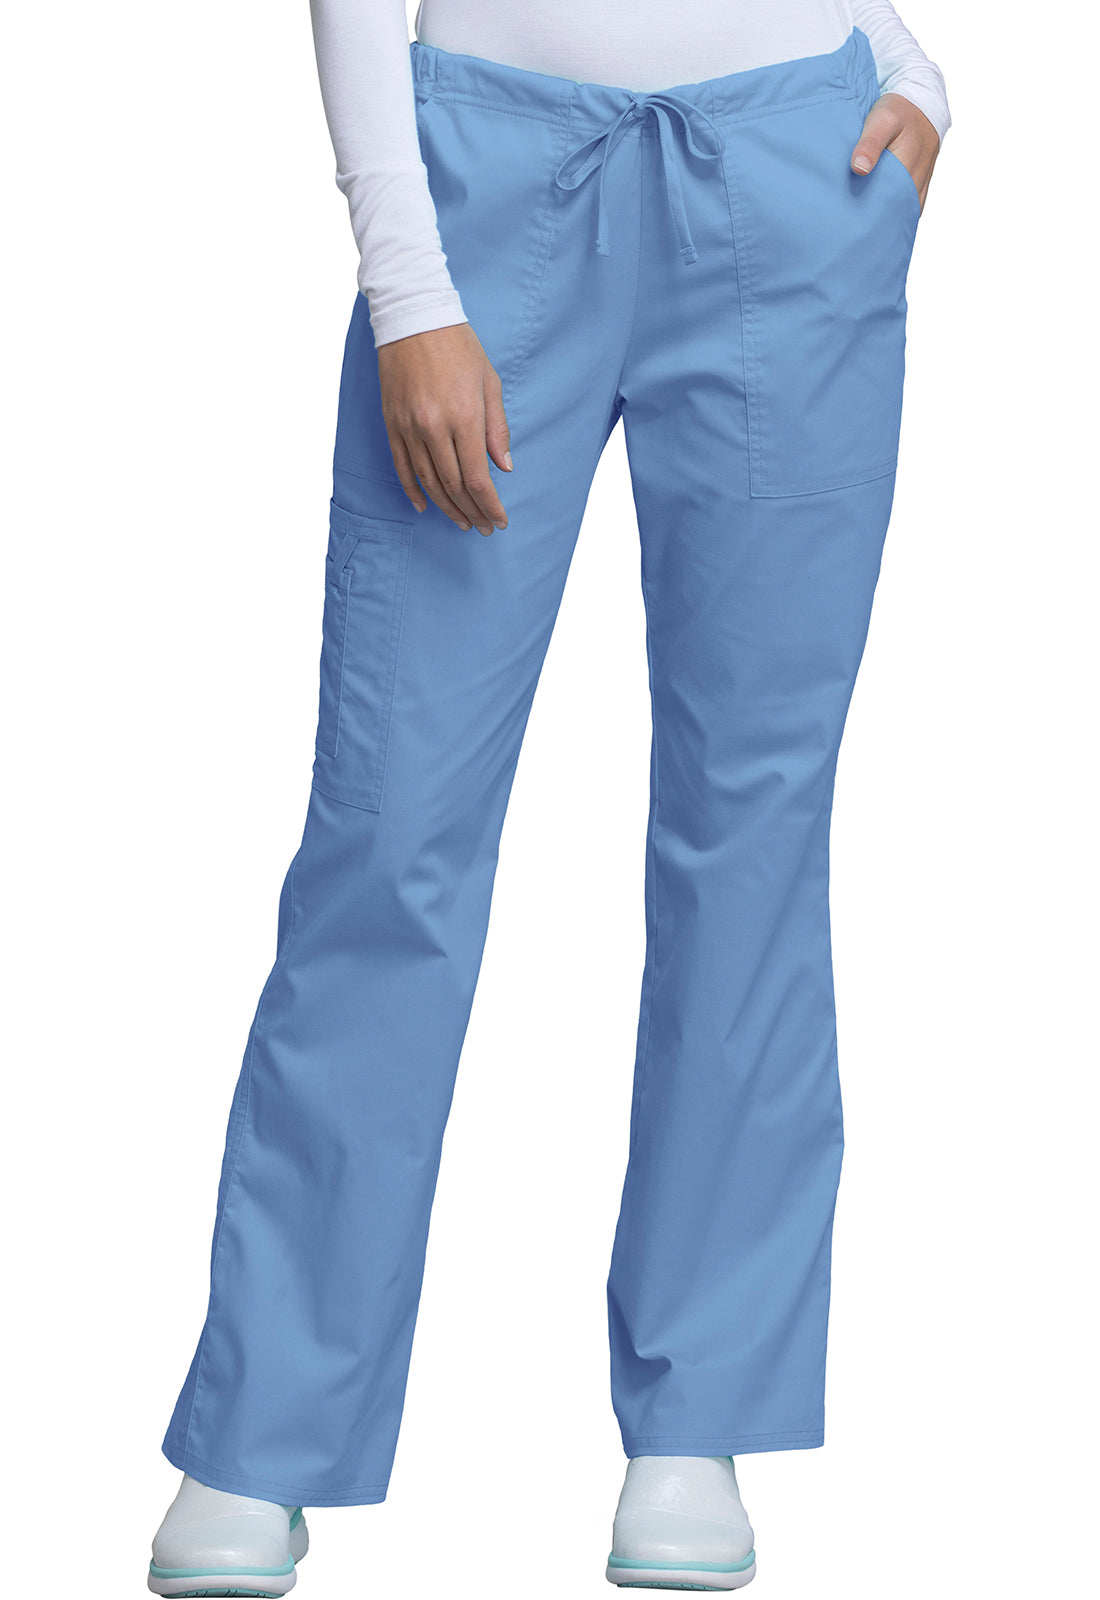 Clearance Cherokee Workwear Core Stretch Tall Drawstring Pants